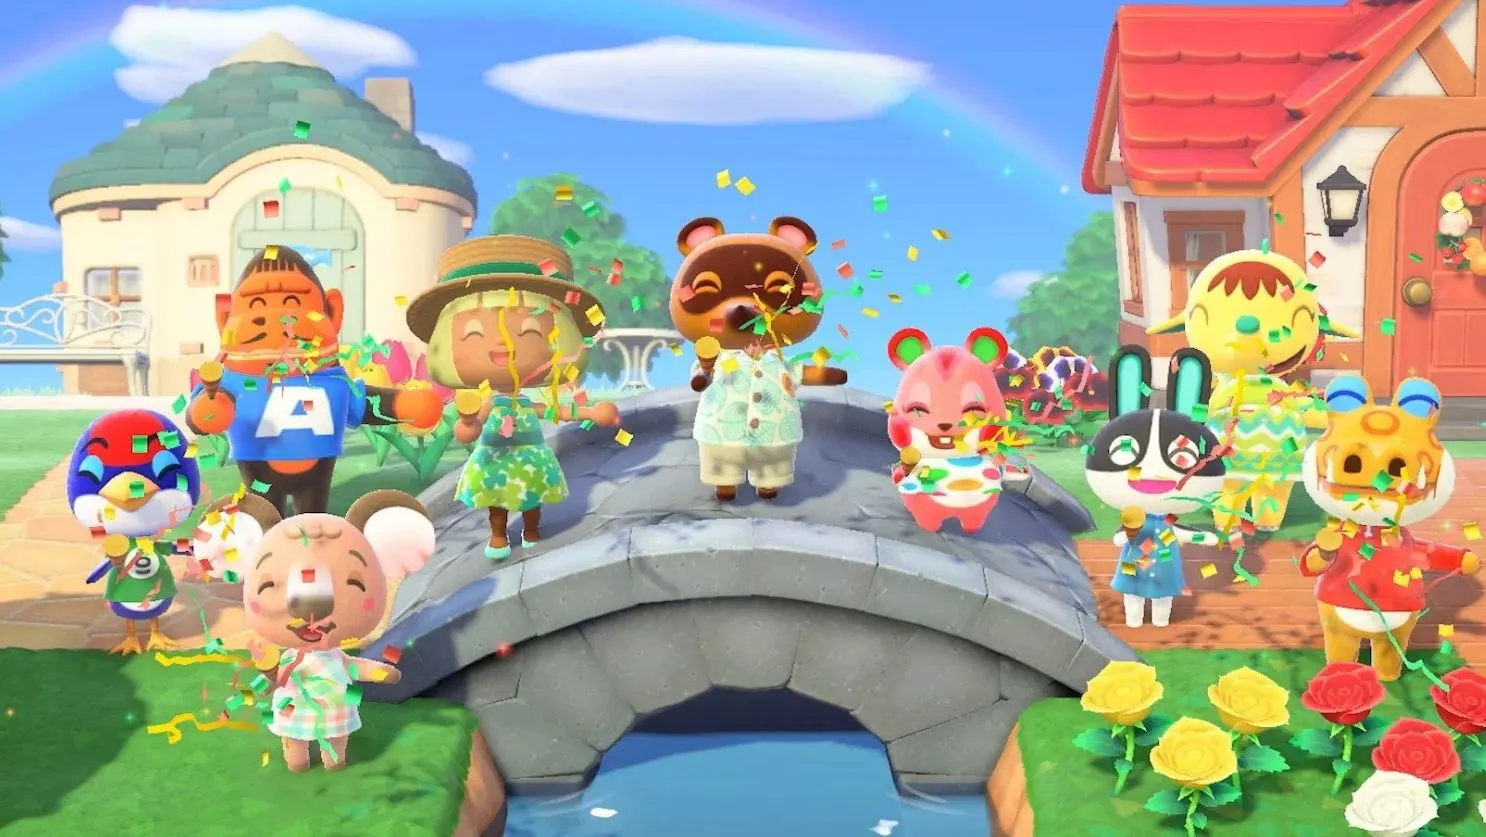  Animal Crossing helped Nintendo sell more Switch consoles than at launch in Japan 